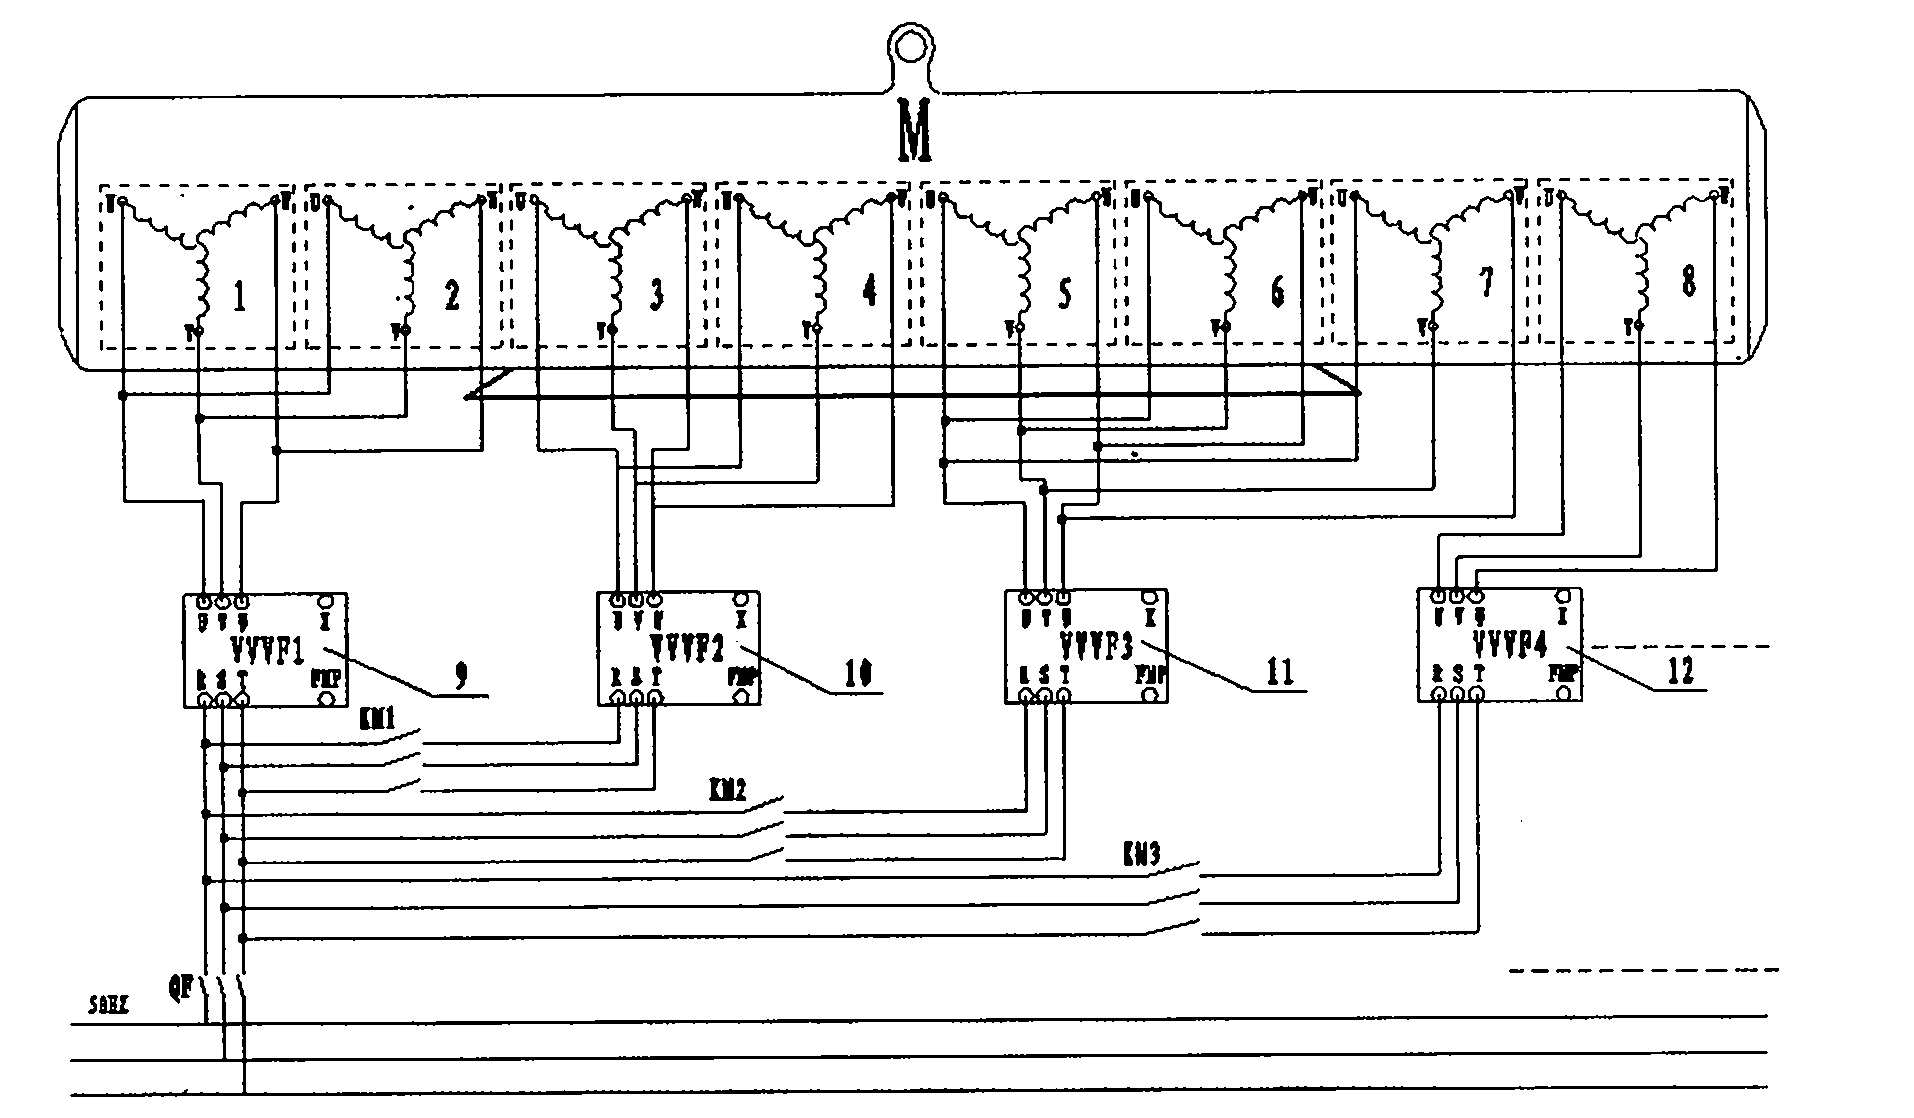 Multi-frequency converter speed-adjusting system for low-voltage high-power multi-branch AC motor